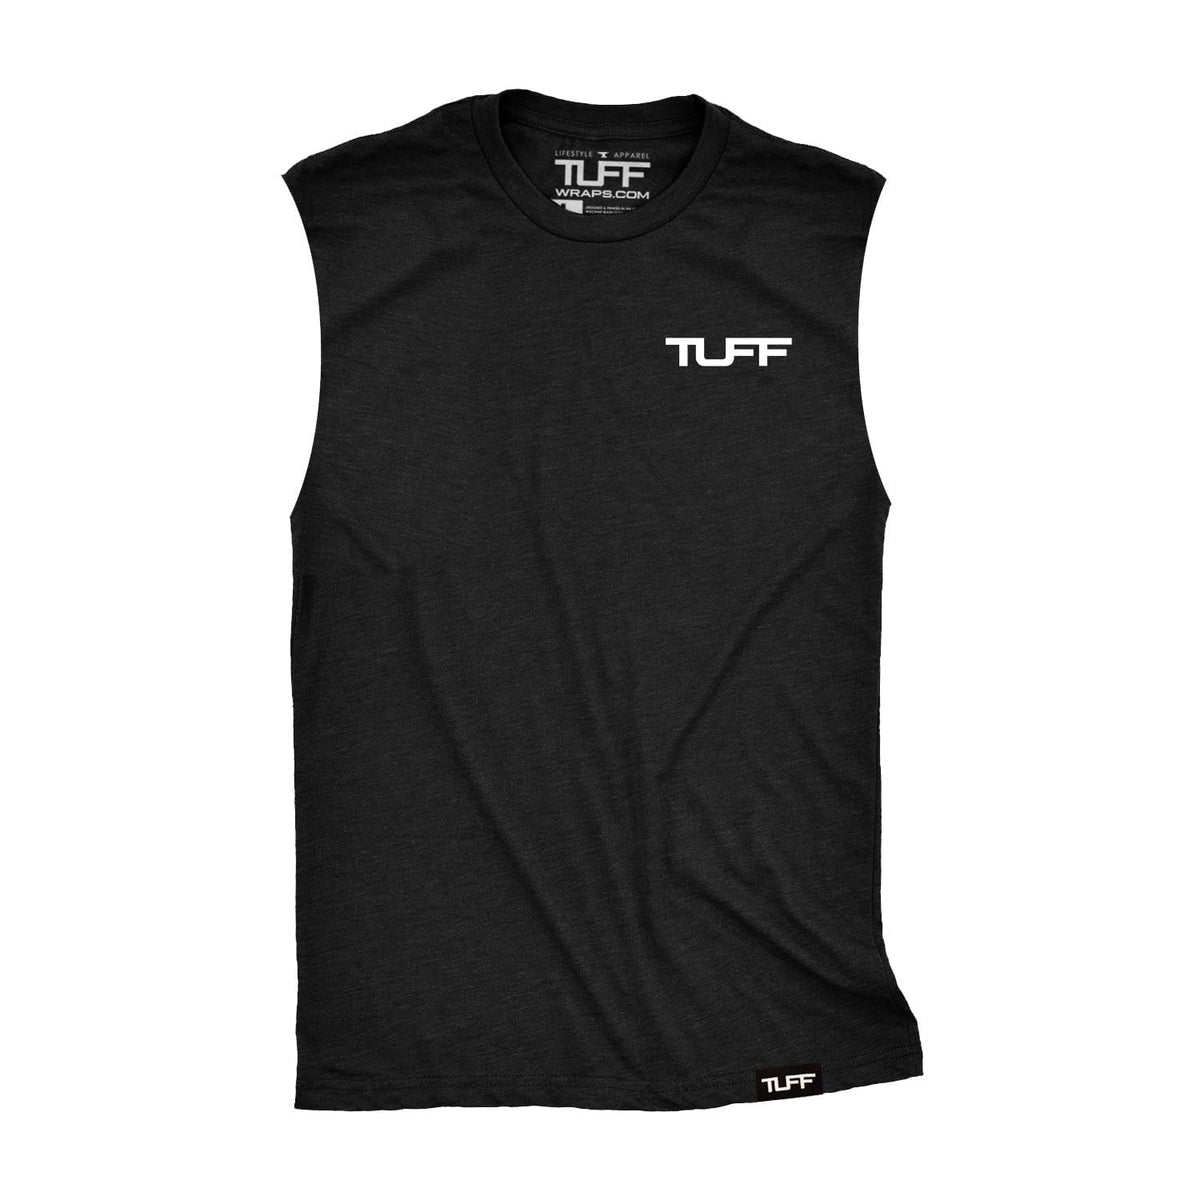 Angels to Some, Death to Most Raw Edge Muscle Tank TuffWraps.com